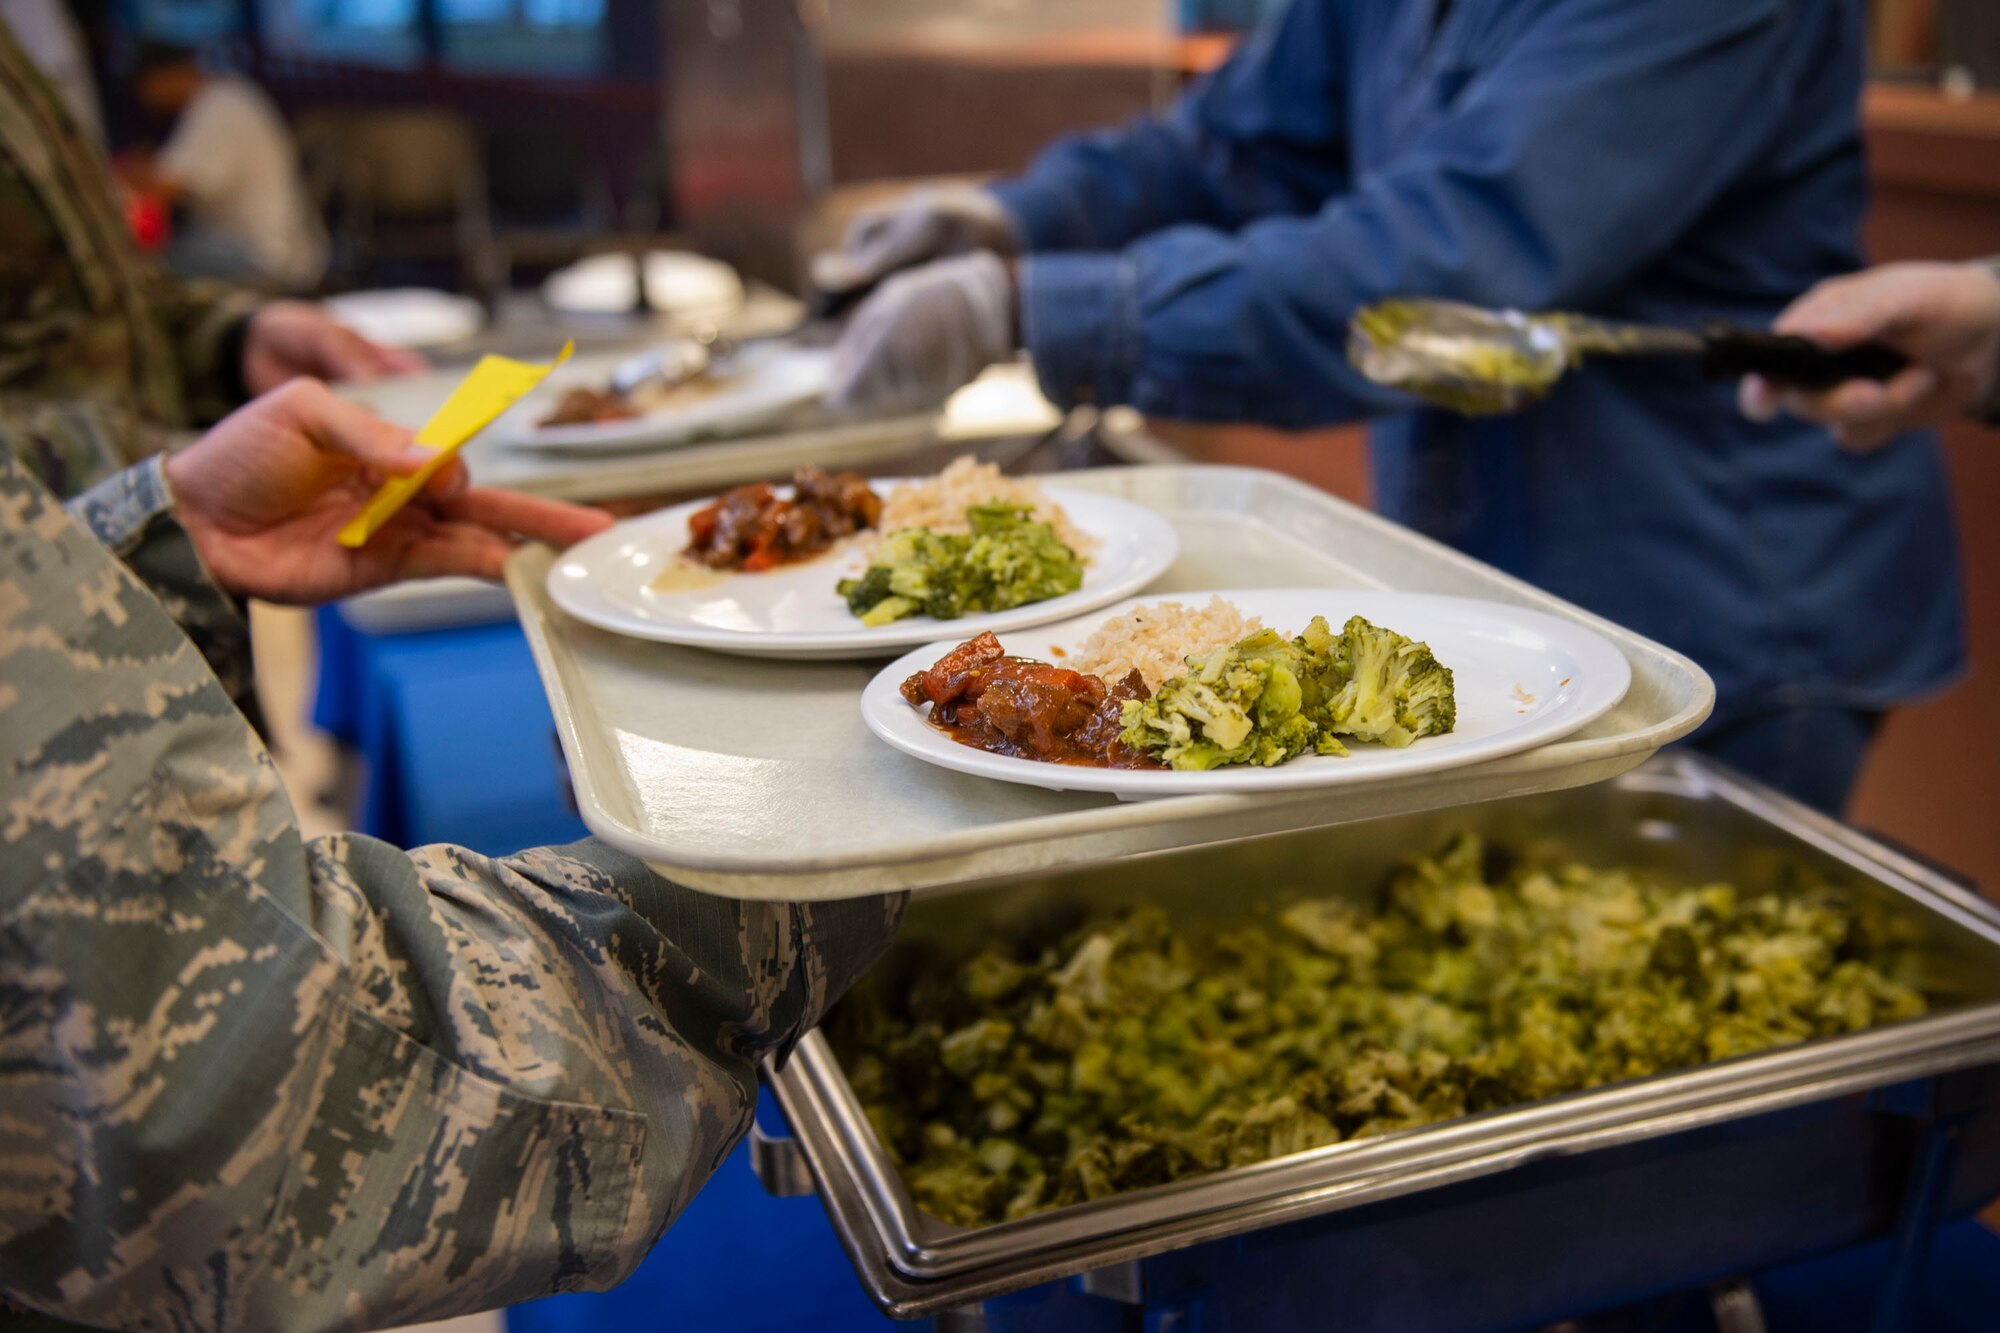 Participants wait in line for food during a Deployed Spouses Dinner Oct. 15, 2019, at Moody Air Force Base, Ga. The monthly event is a free dinner at Georgia Pines Dining Facility designed as a ‘thank you’ for each family’s support and sacrifice. The dinner, occurring on every third Tuesday of the month, provides an opportunity for spouses to interact with other families of deployed Airmen, key spouses and unit leadership as well as provide a break for the spouse while their military sponsor is deployed. The next Deployed Spouses Dinner will be Nov. 19. (U.S. Air Force photo by Airman Azaria E. Foster)